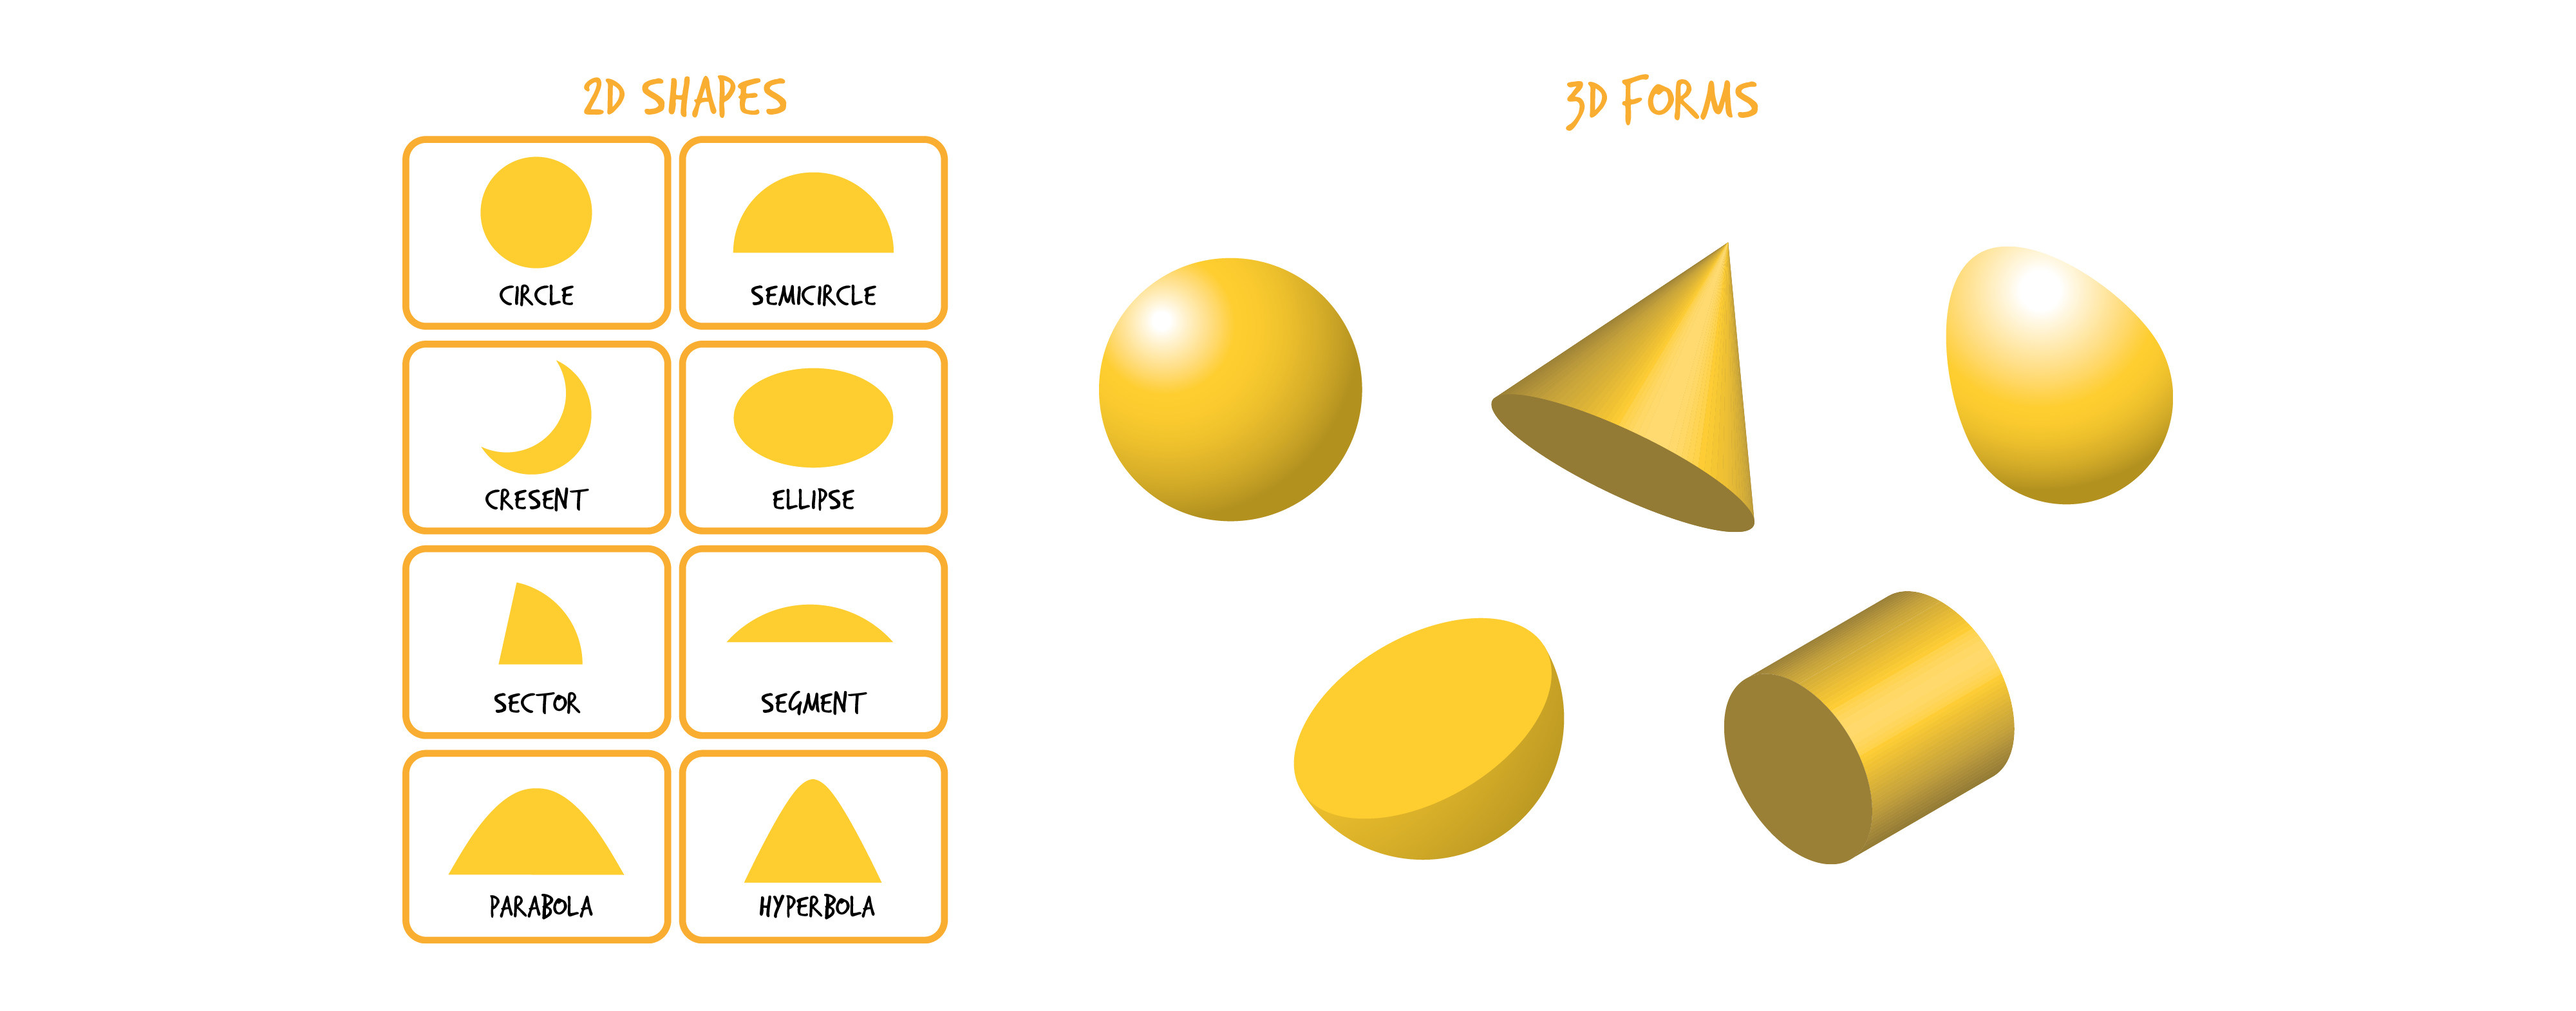 This image contains two main sections: on the left are examples of two-dimensional shapes and on the right are examples of three-dimensional forms, all in yellow. All shapes and forms are titled accordingly on the image. The two-dimensional shapes, in reading order from left to right: circle, semi-circle, crescent, ellipse, sector, segment, parabola, and hyperbola. The three-dimensional forms on the right show 5 examples of various curvilinear forms, including a sphere, a cone, a semi-circle, and a cylinder.